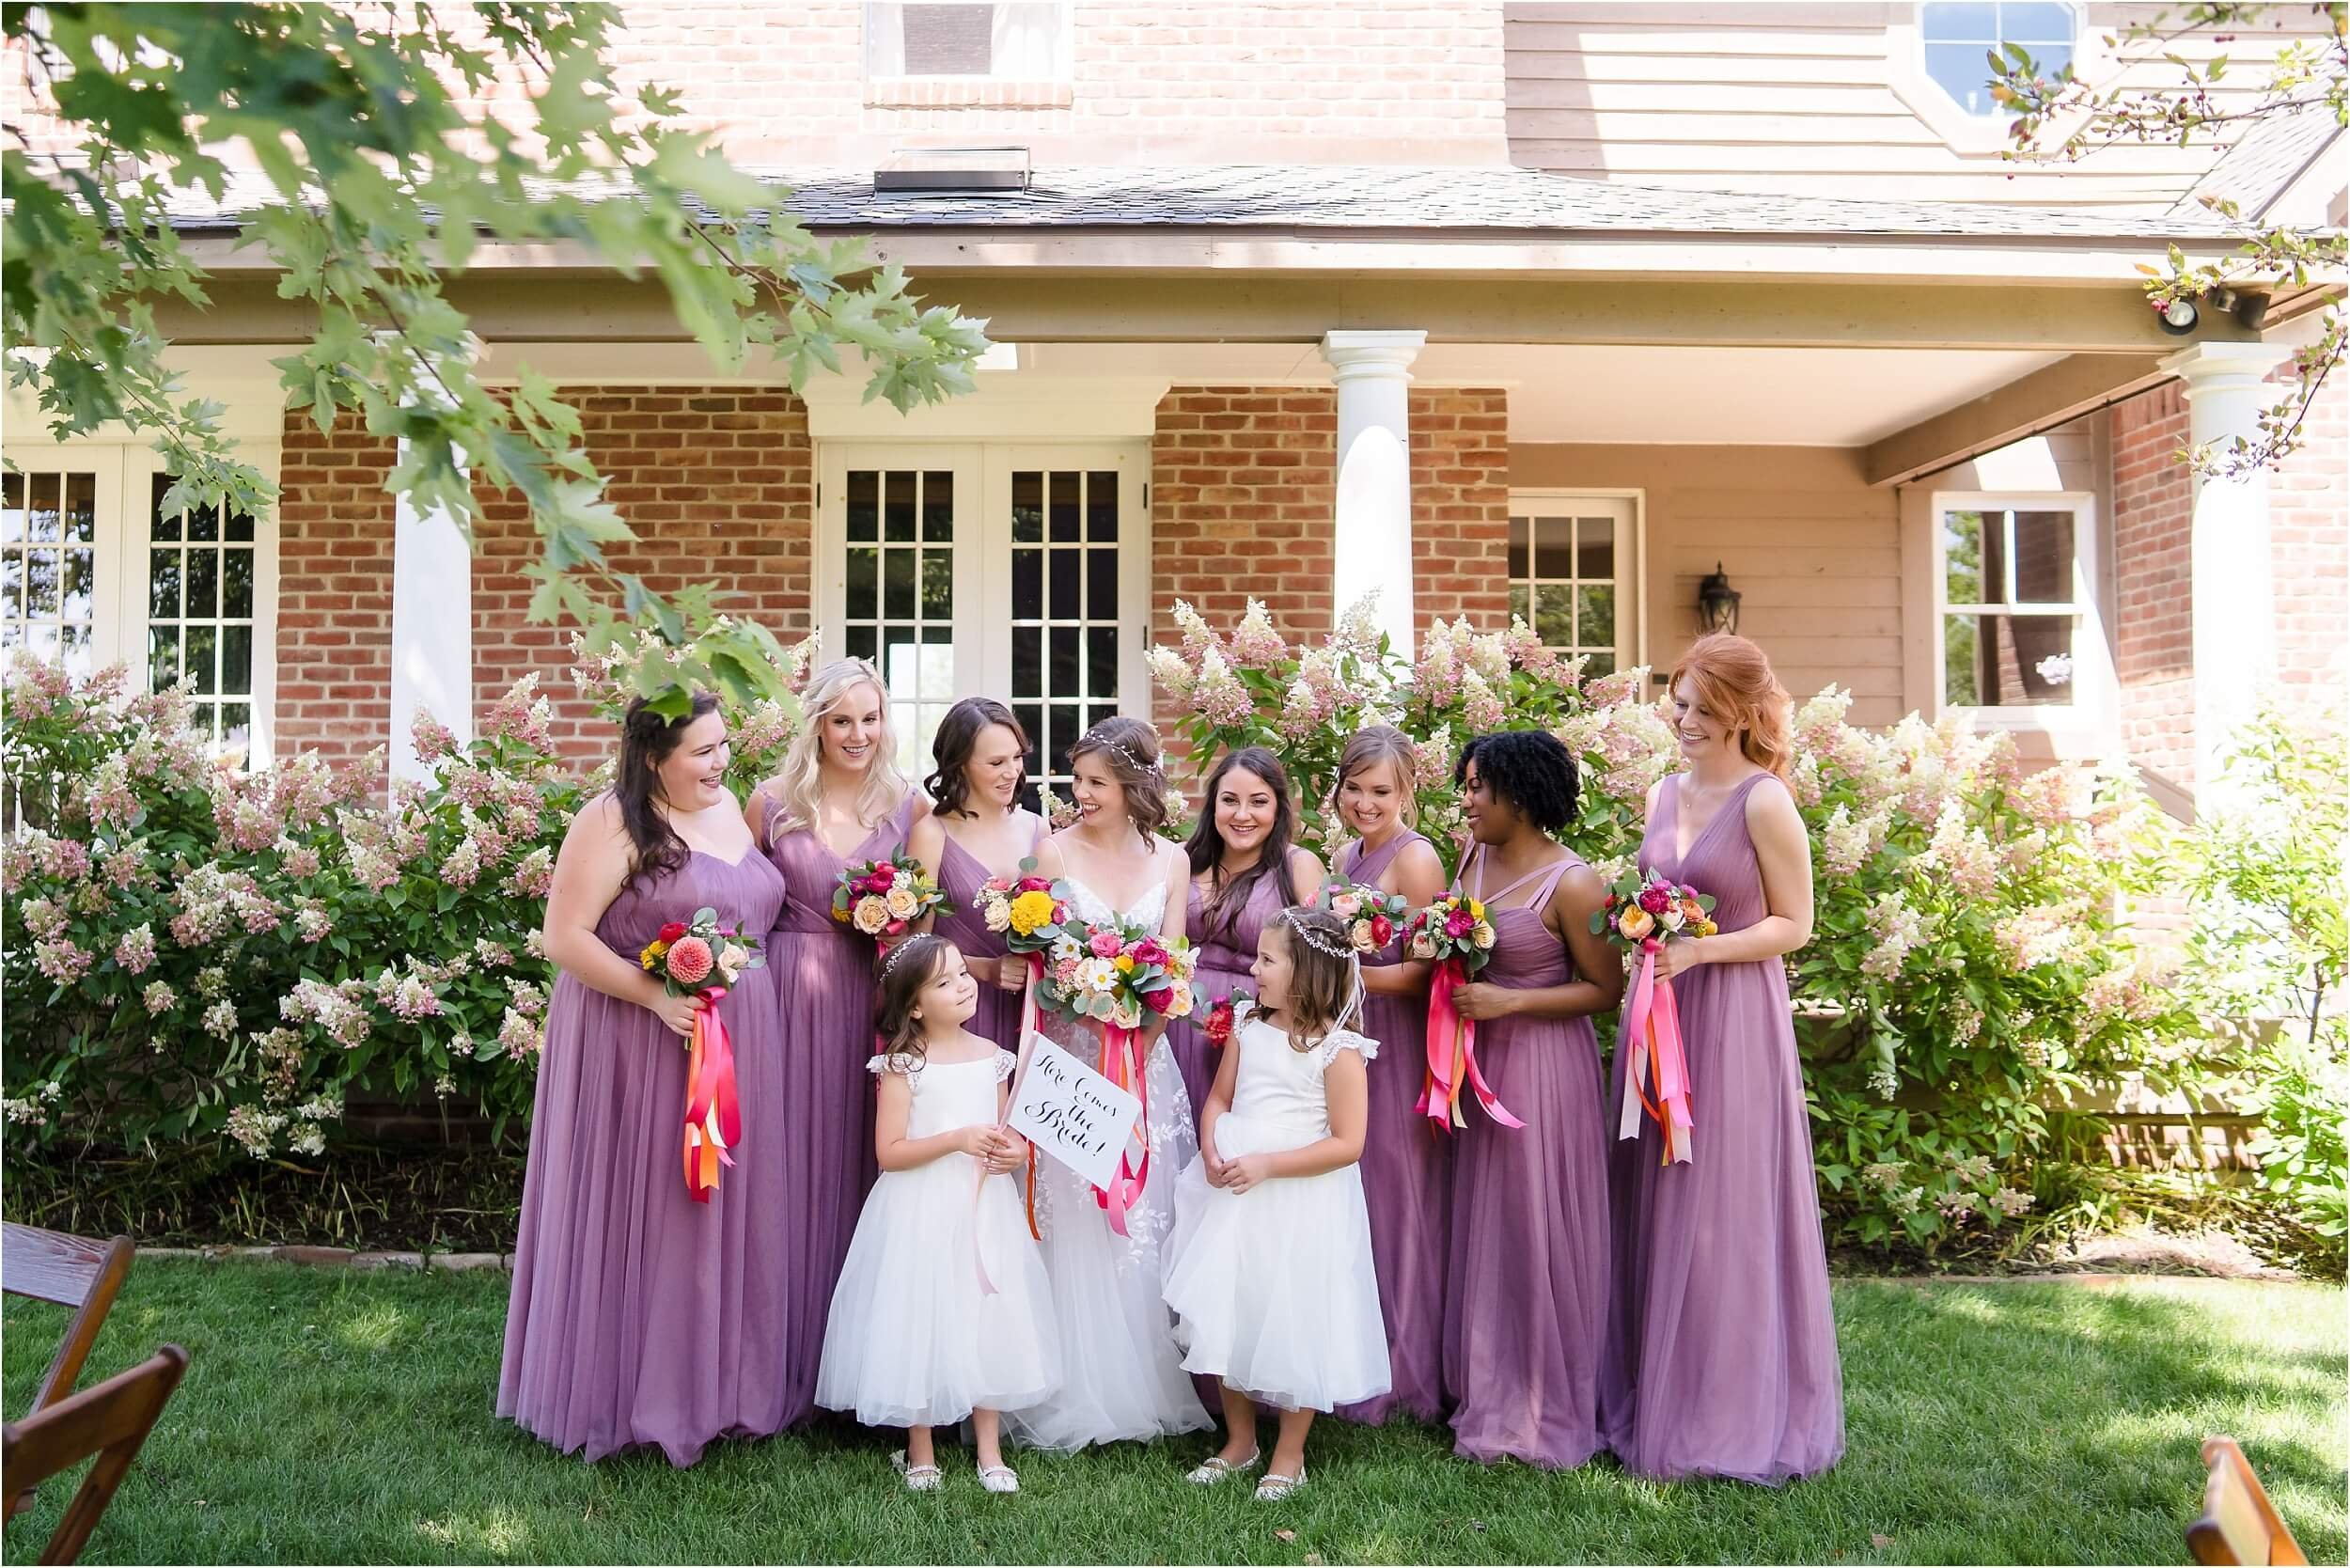  Five bridesmaids, two flower girls, and a bride all talk during their portrait session at a popular wedding venue in ann arbor.  